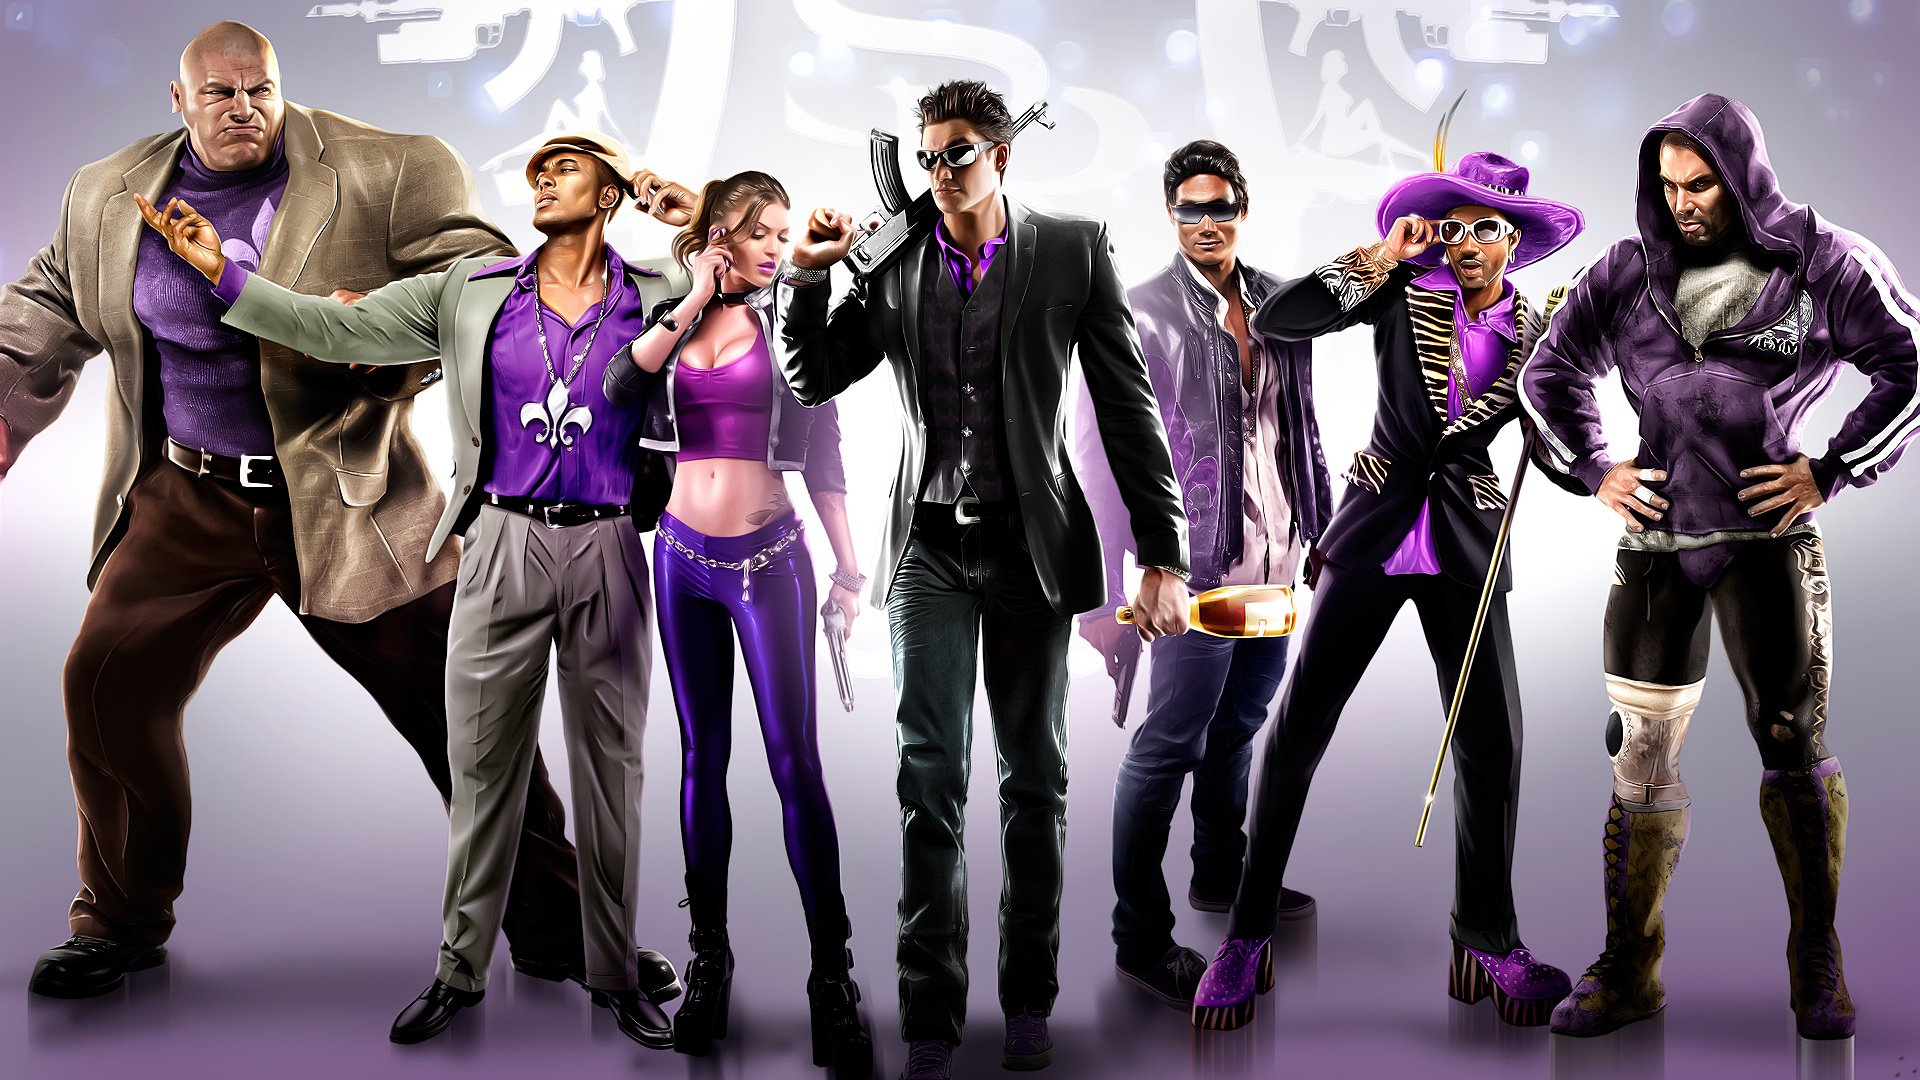 1920x1080 130+ Saints Row HD Wallpapers and Backgrounds